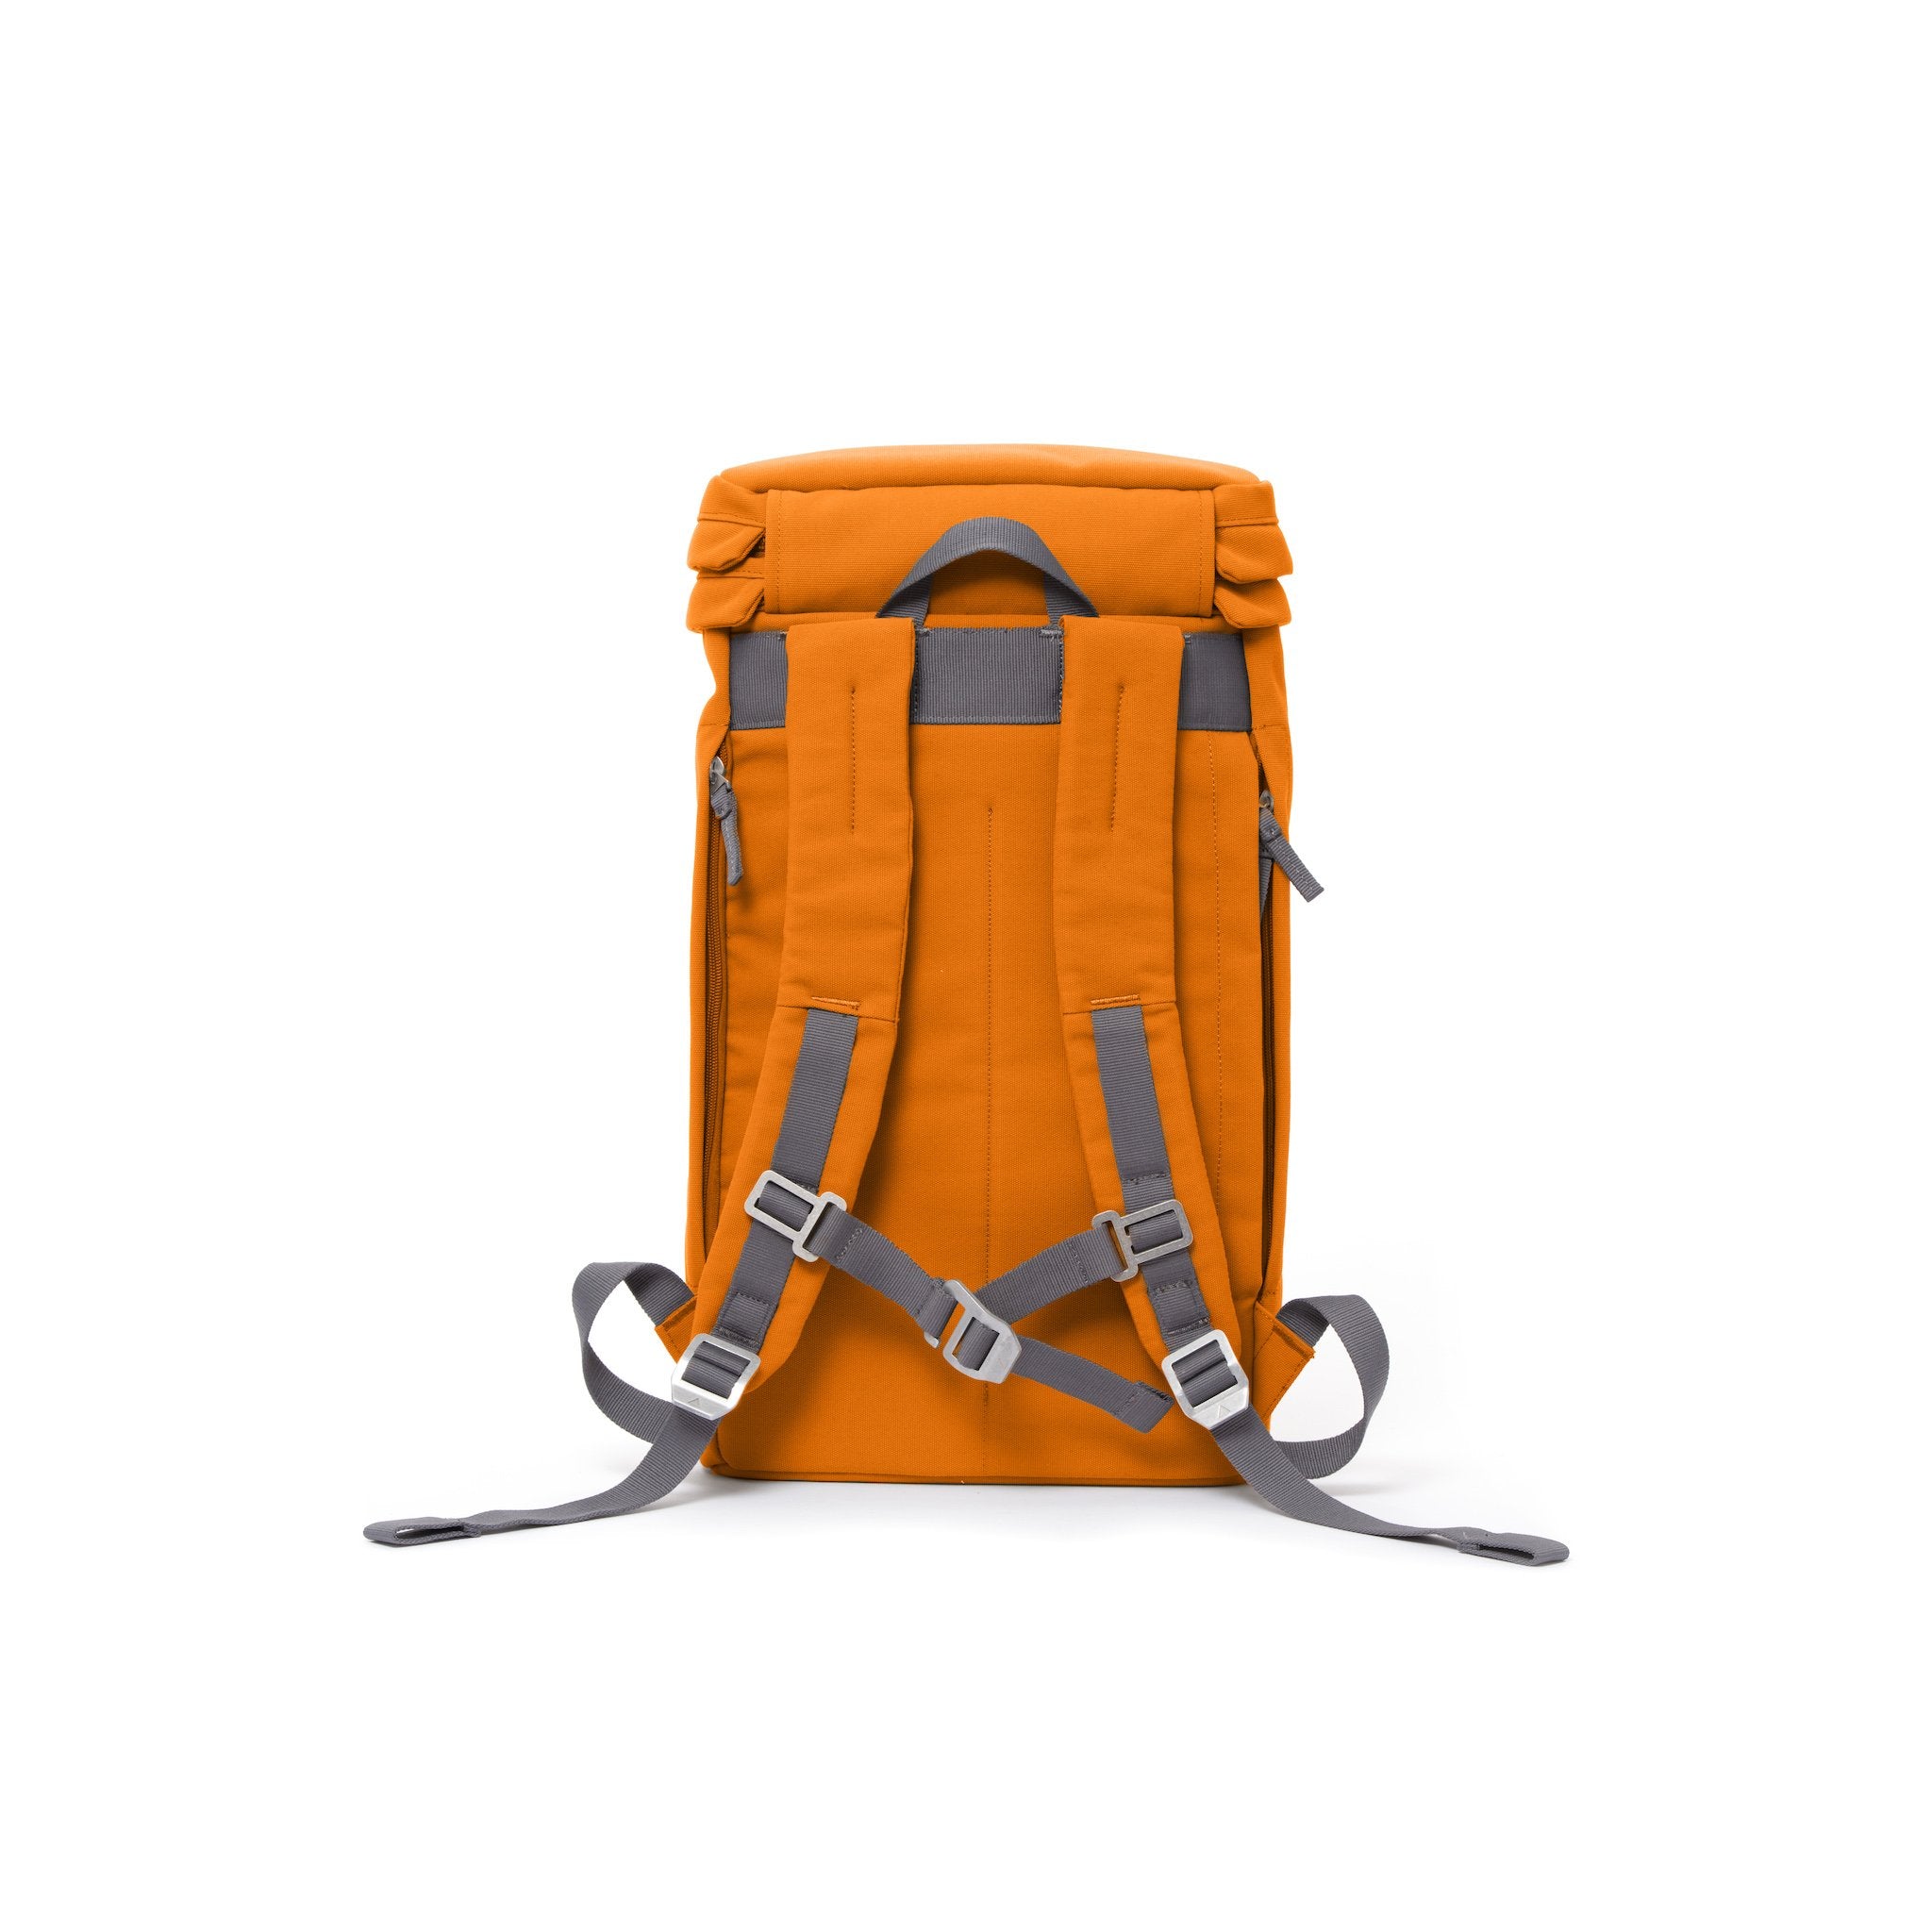 Orange canvas backpack with padded shoulder straps and chest strap.